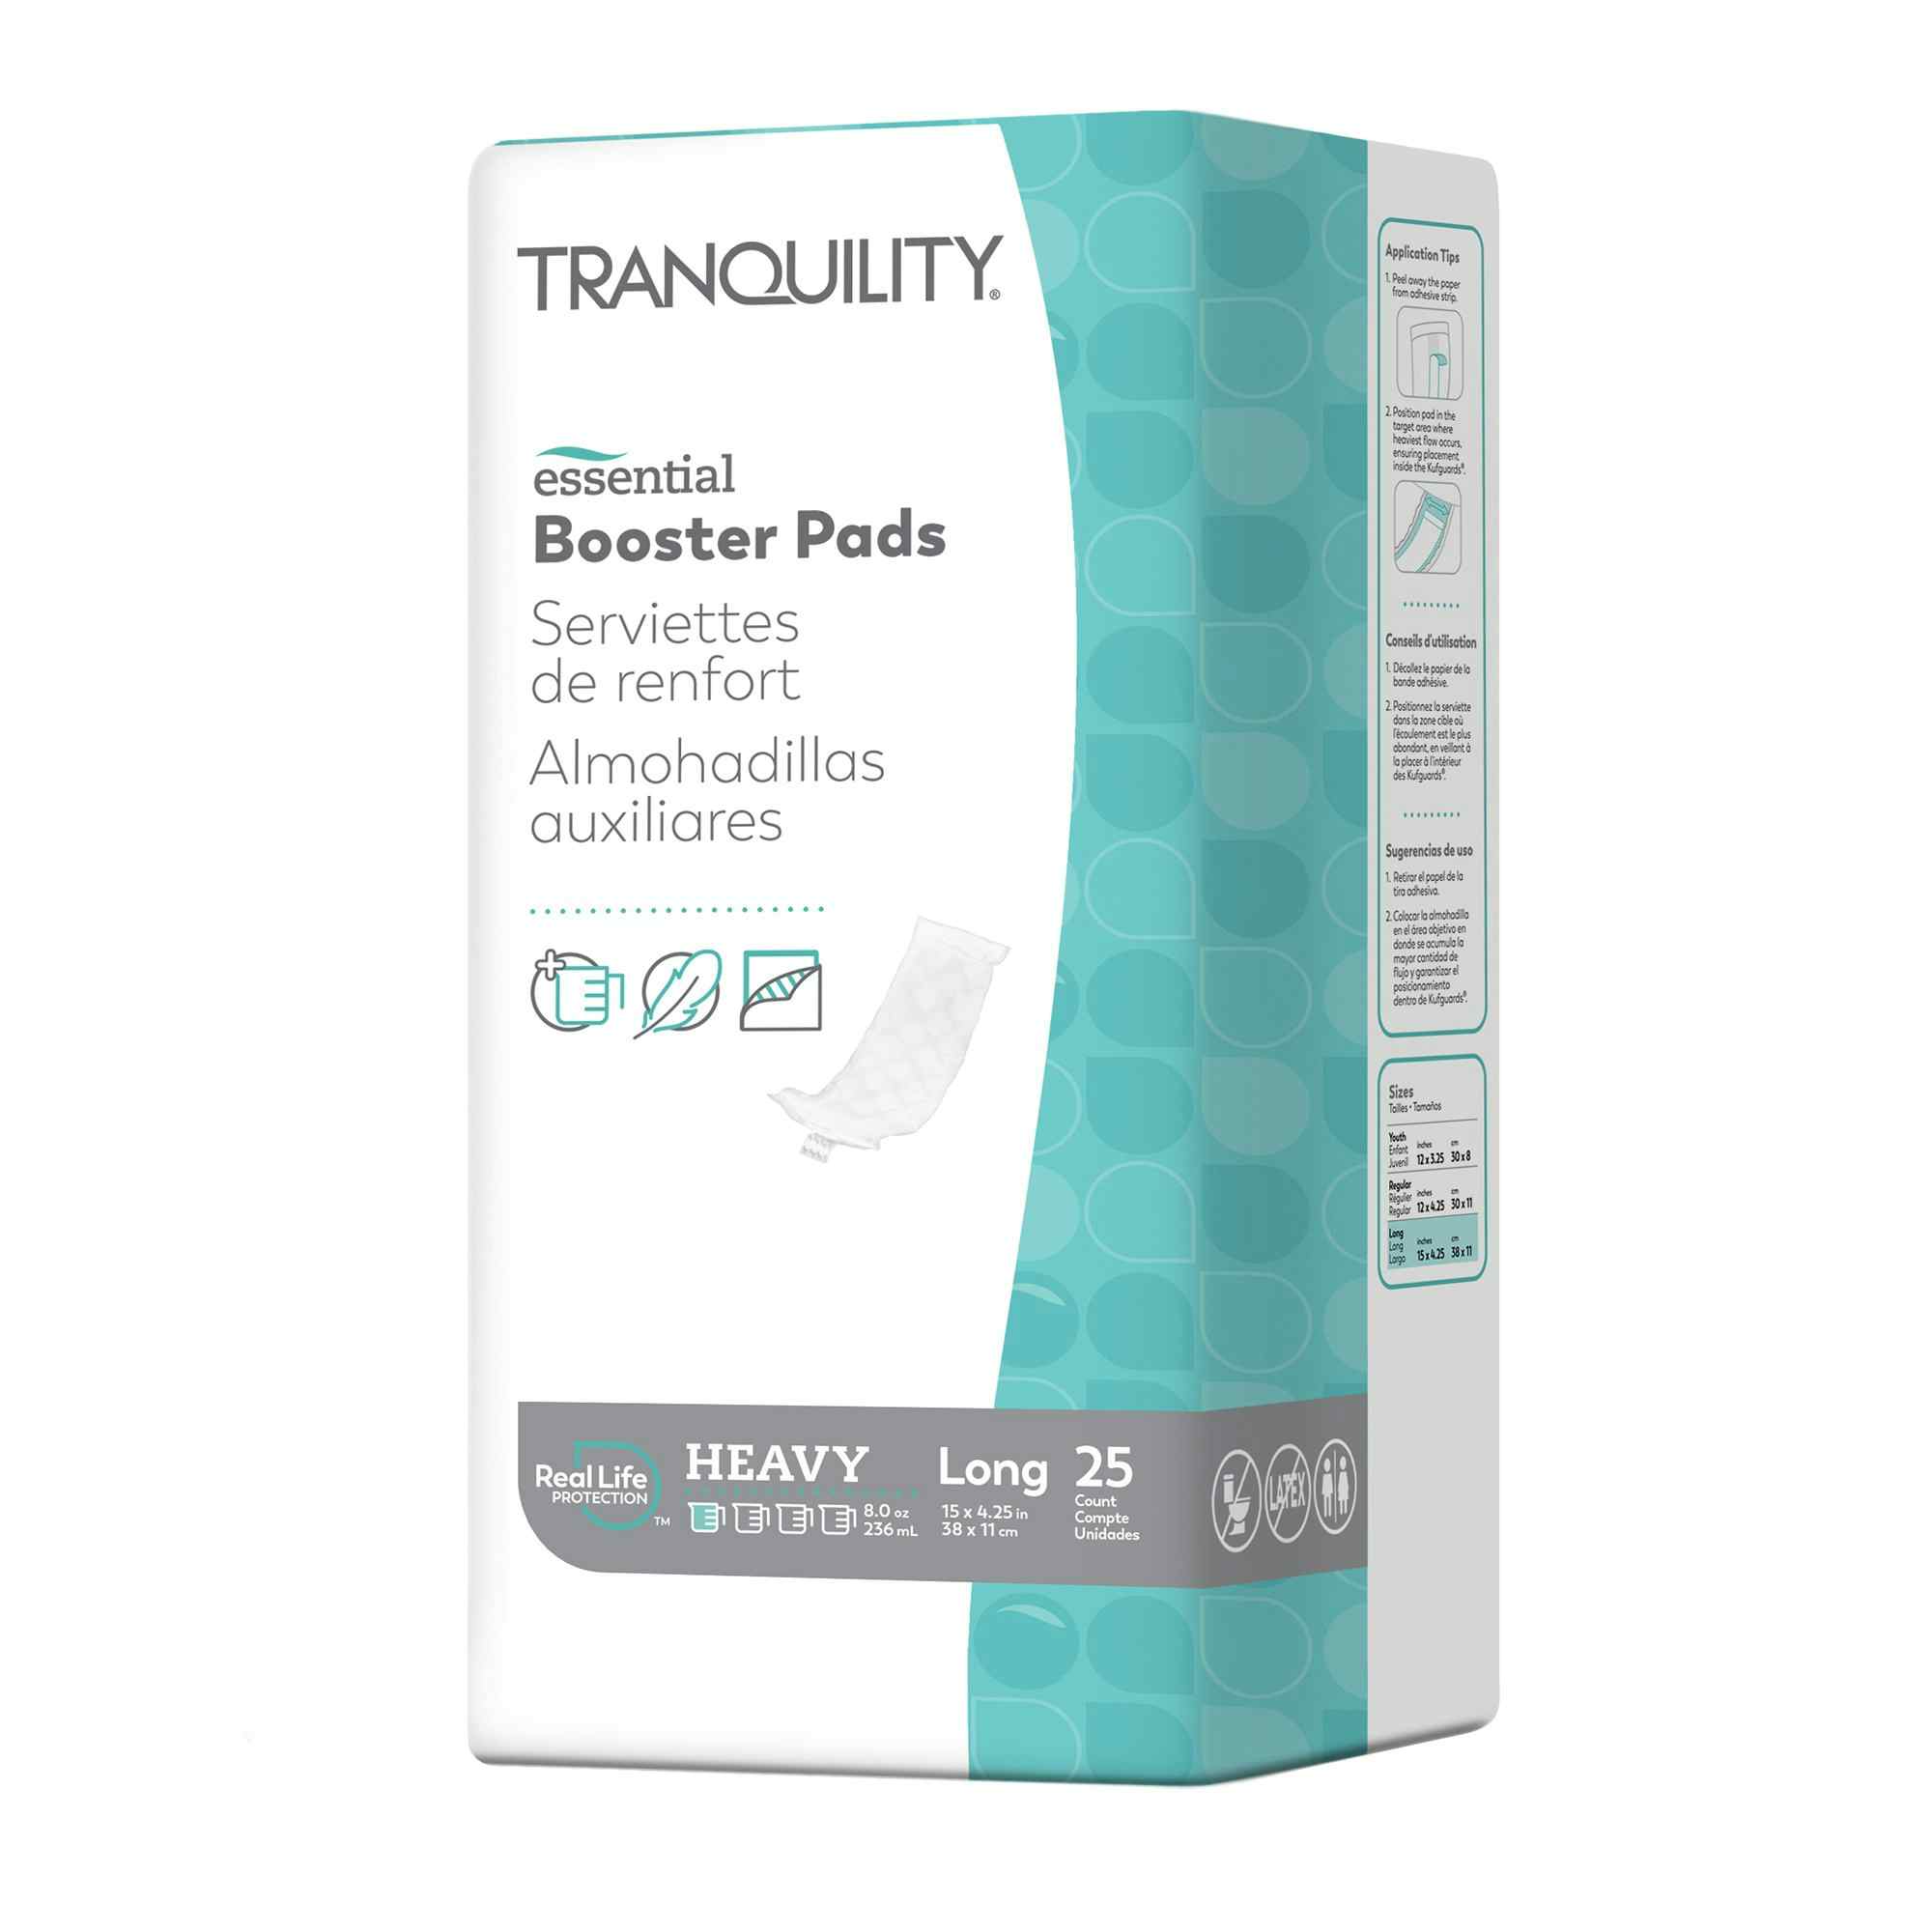 Tranquility Essentials Booster